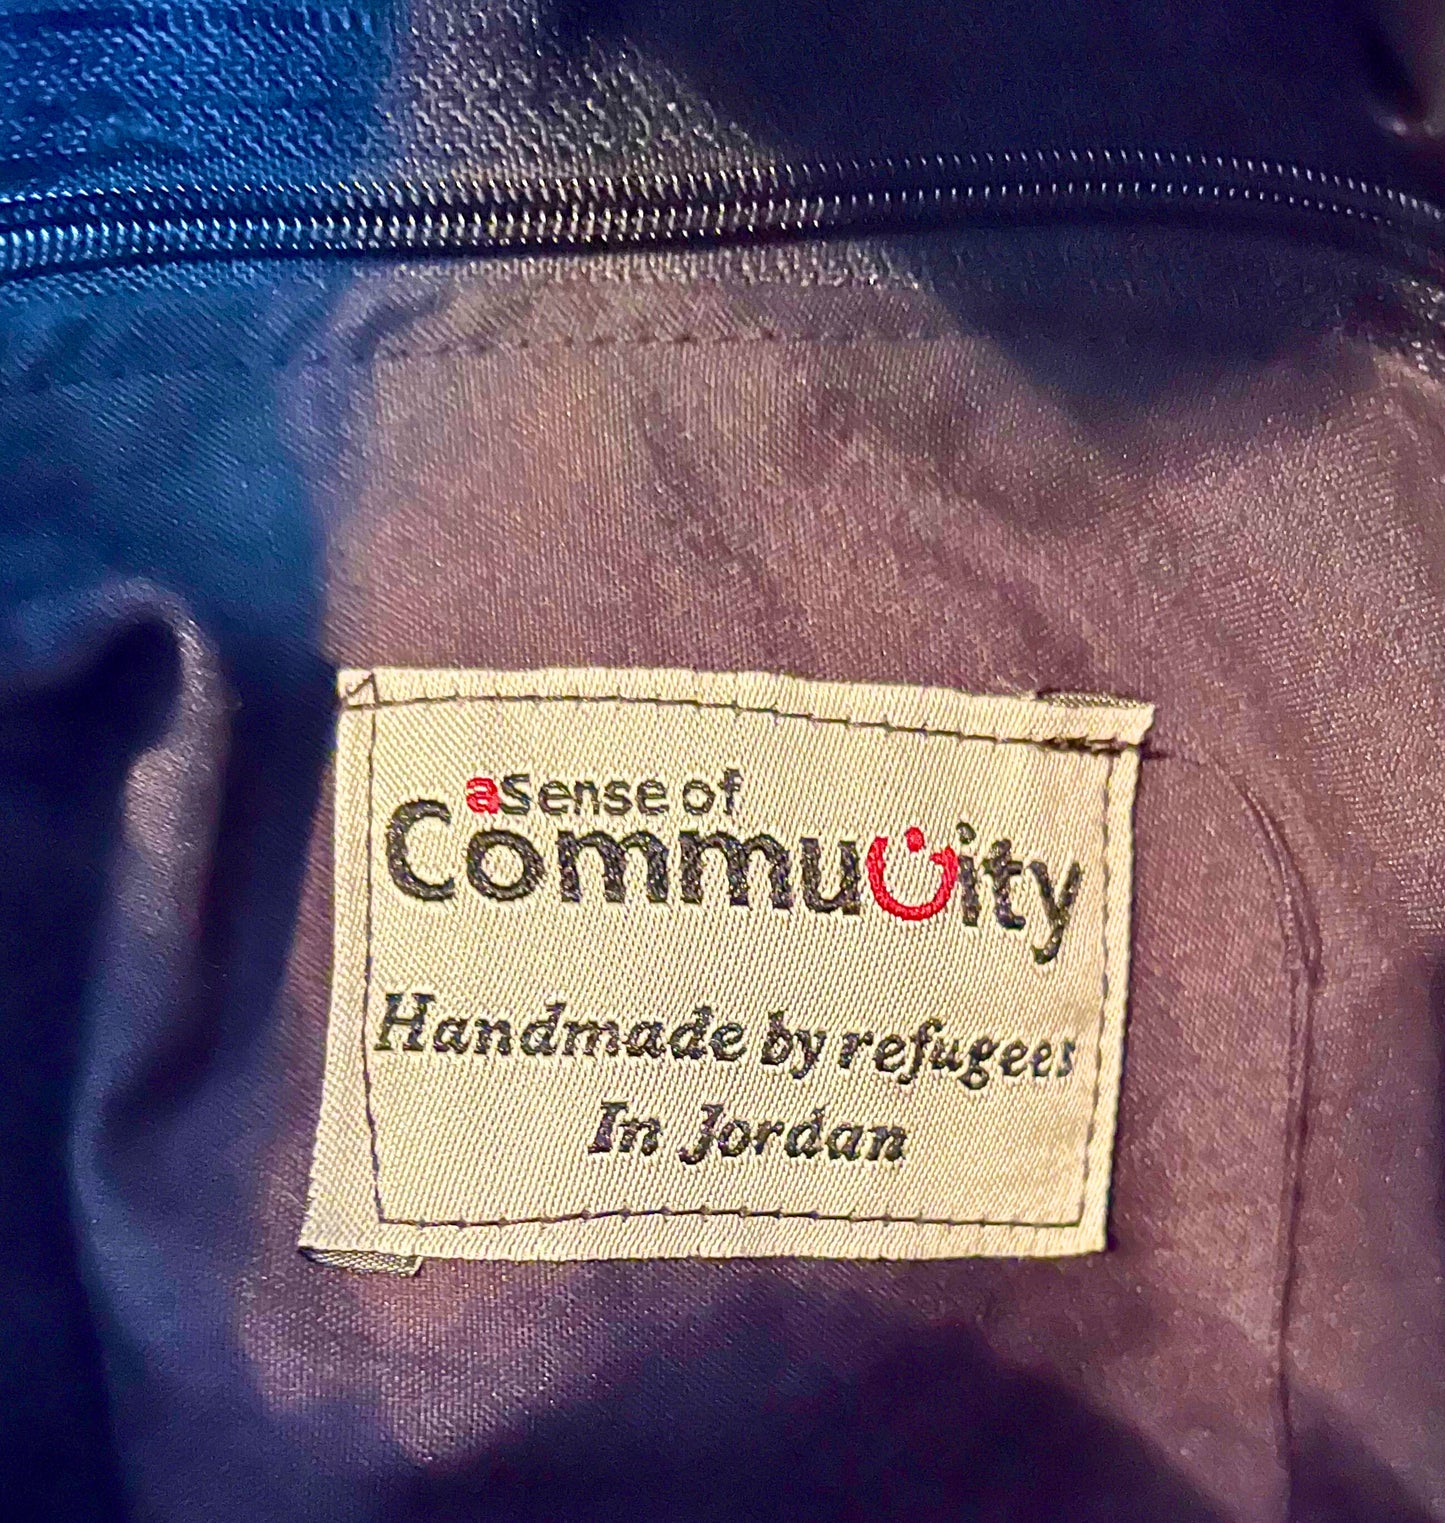 Finished with a hand stitched tag from "a Sense of Community", part of the Nün Project.  Handmade by refugees in Jordan. 